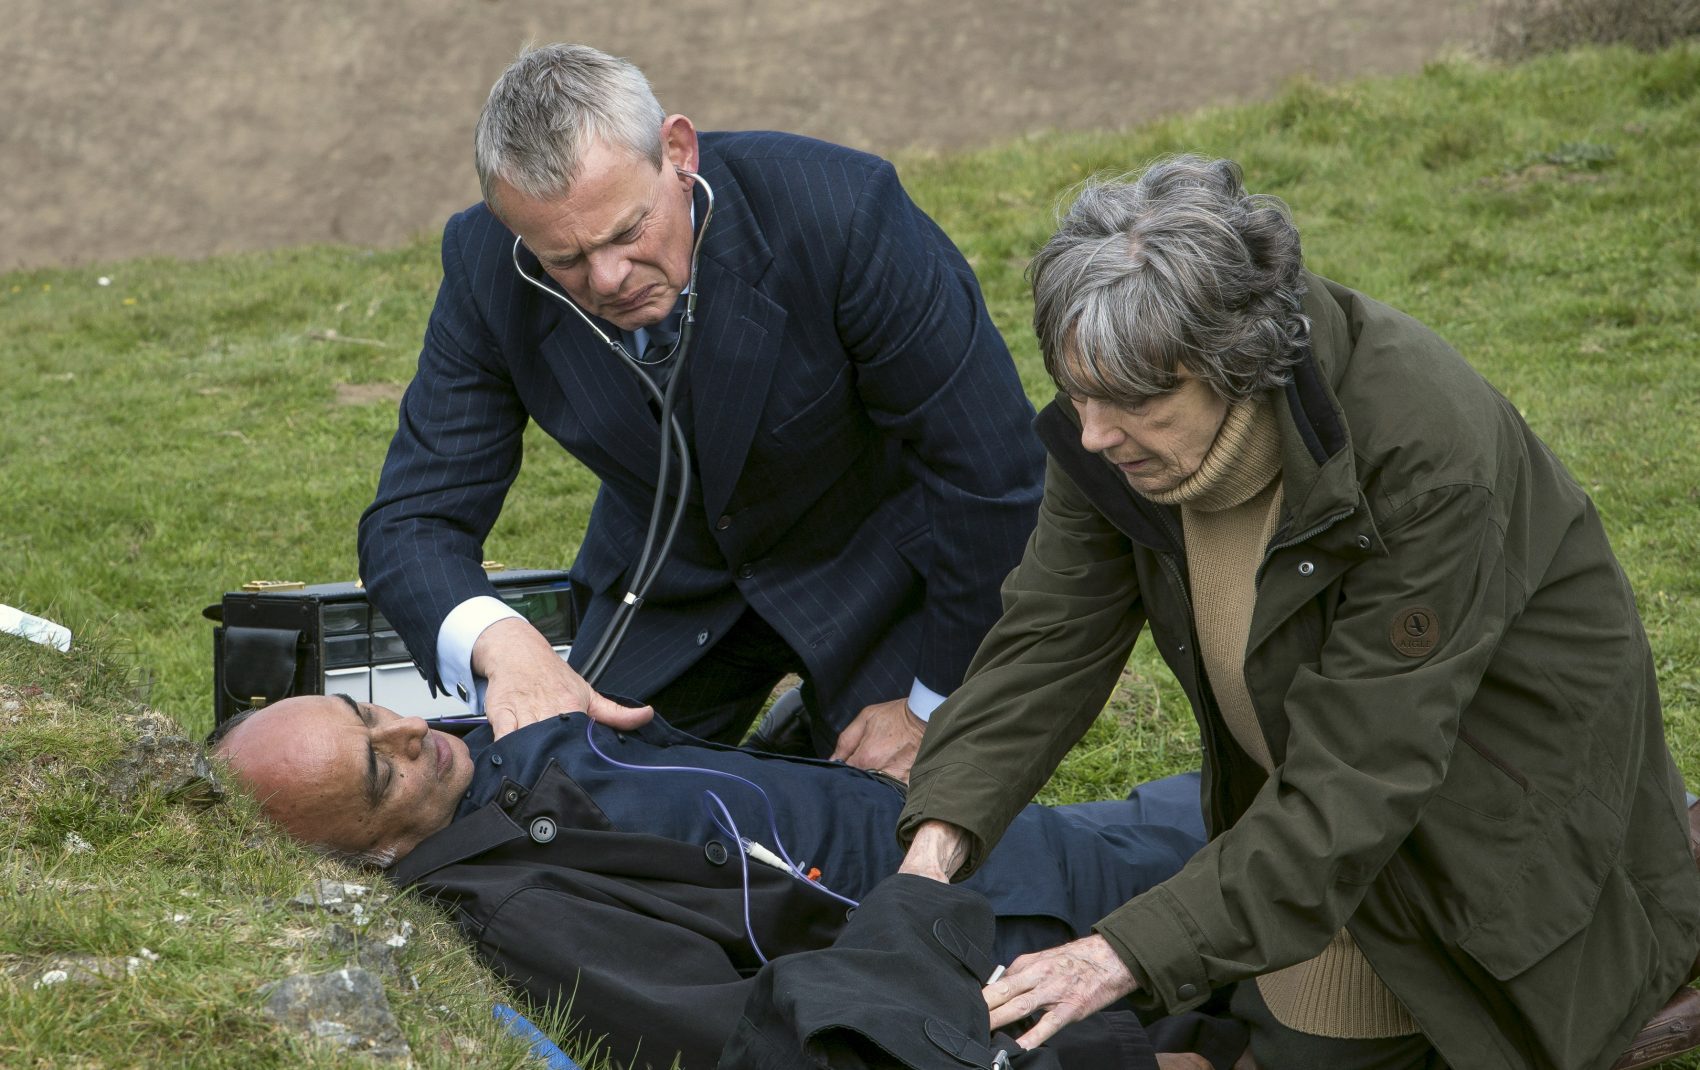 Martin Clunes as &quot;Doc Martin&quot; tends to Art Malik as a visitor to Portwenn. Eileen Atkins plays his aunt. (Courtesy of Acorn TV)